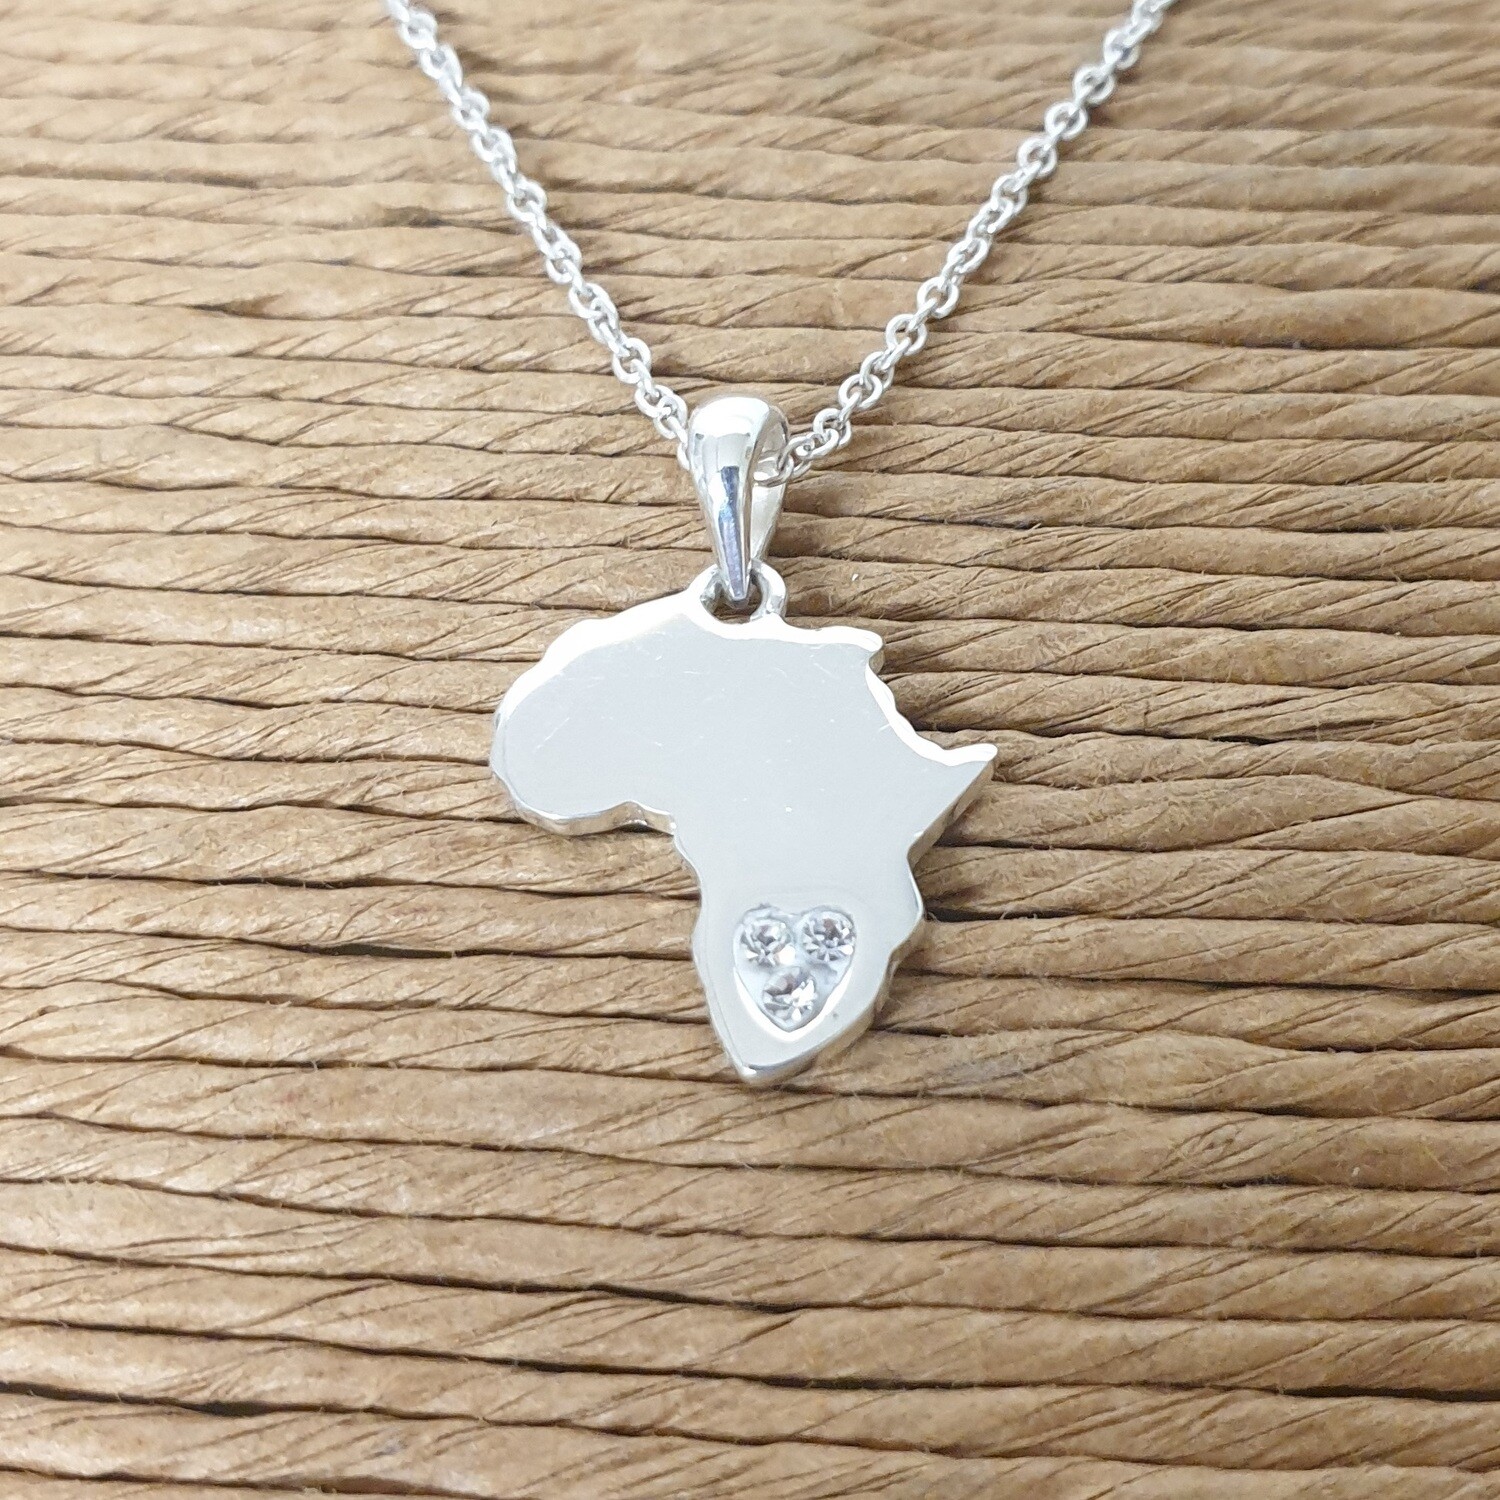 Africa Sparkle pendant and necklace small